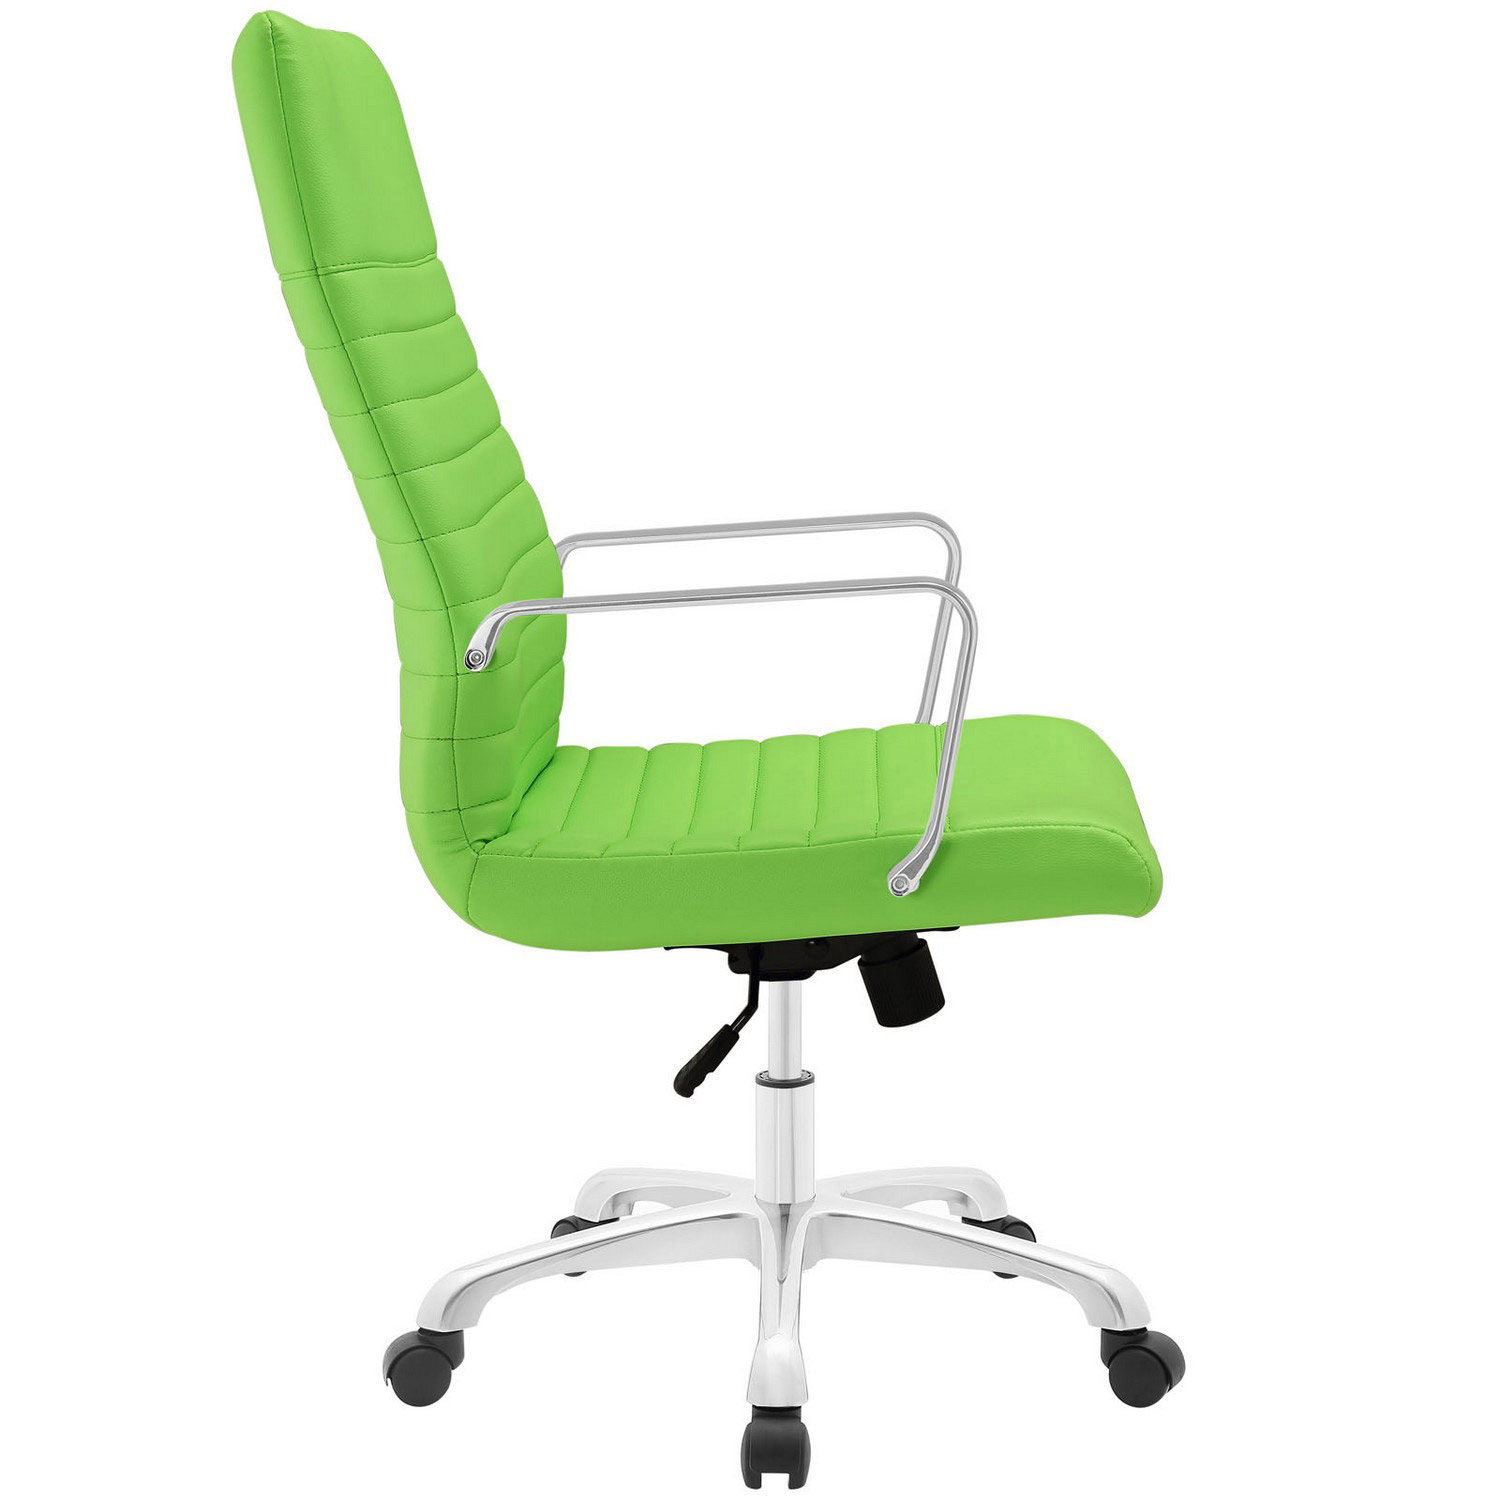 Modway Finesse Highback Office Chair - Bright Green